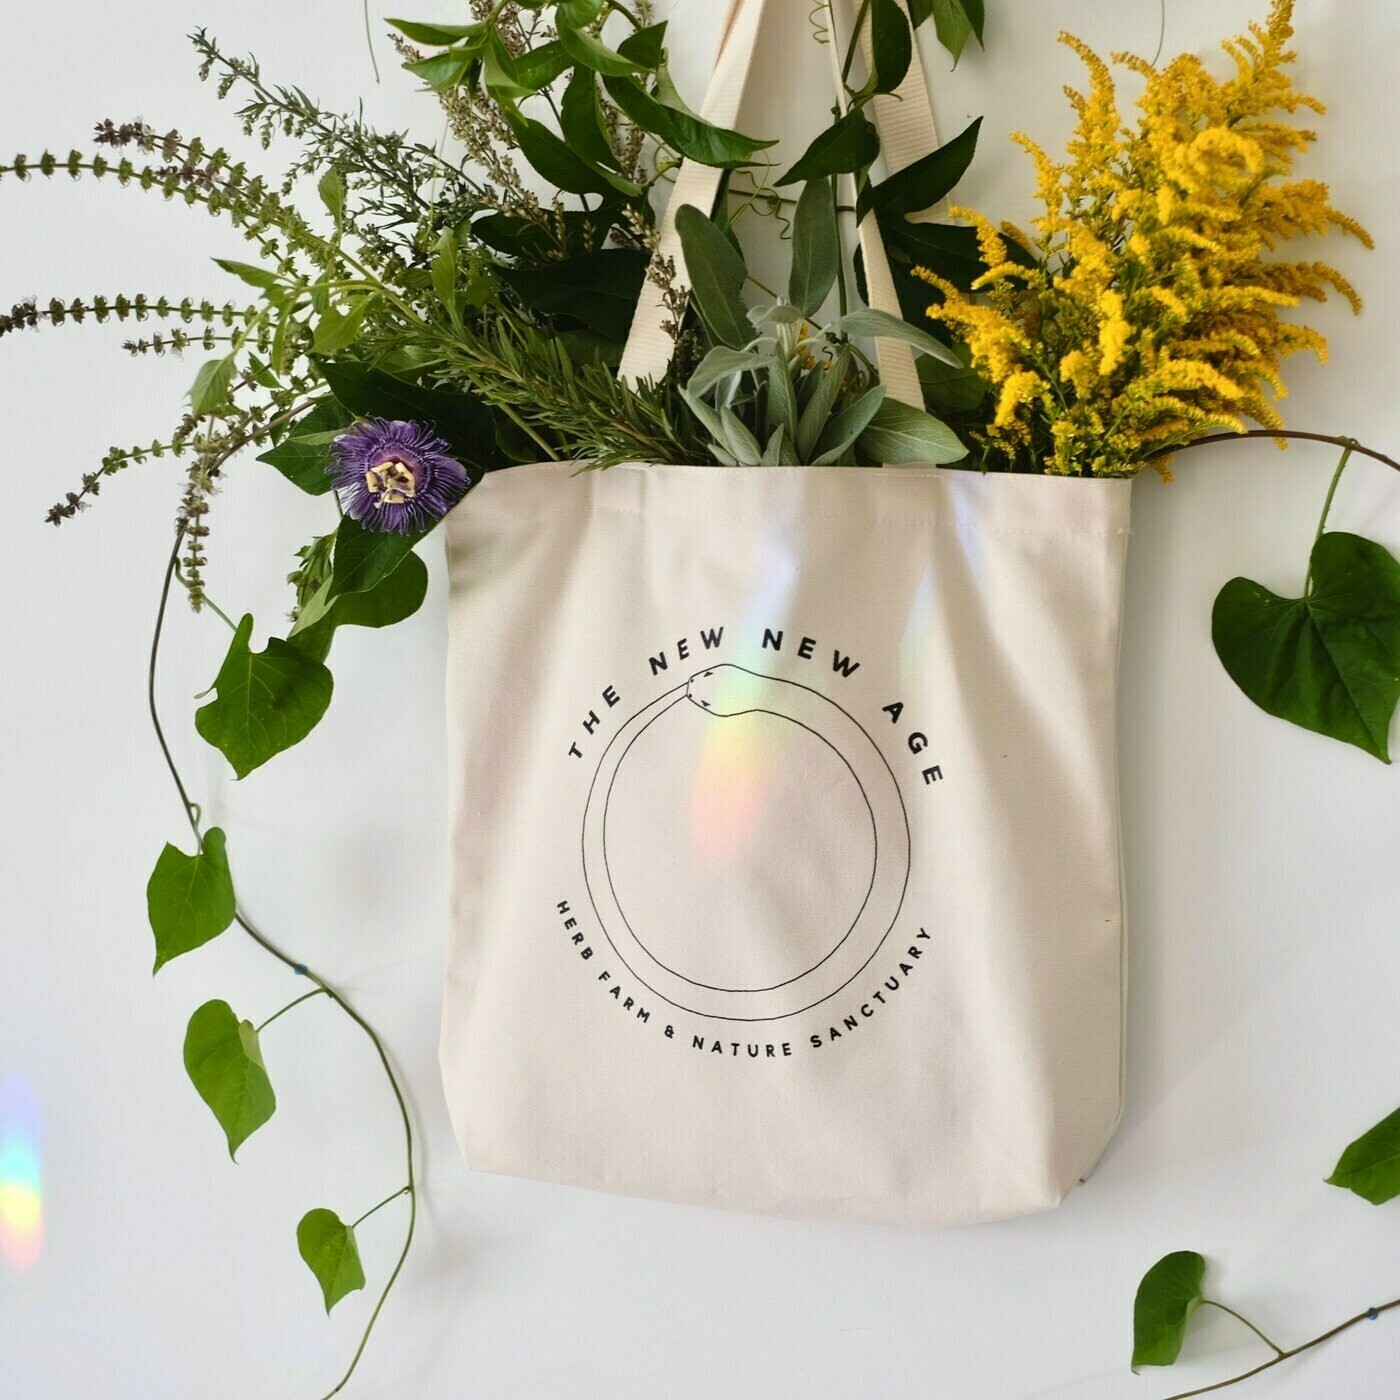 The New New Age Tote Bag